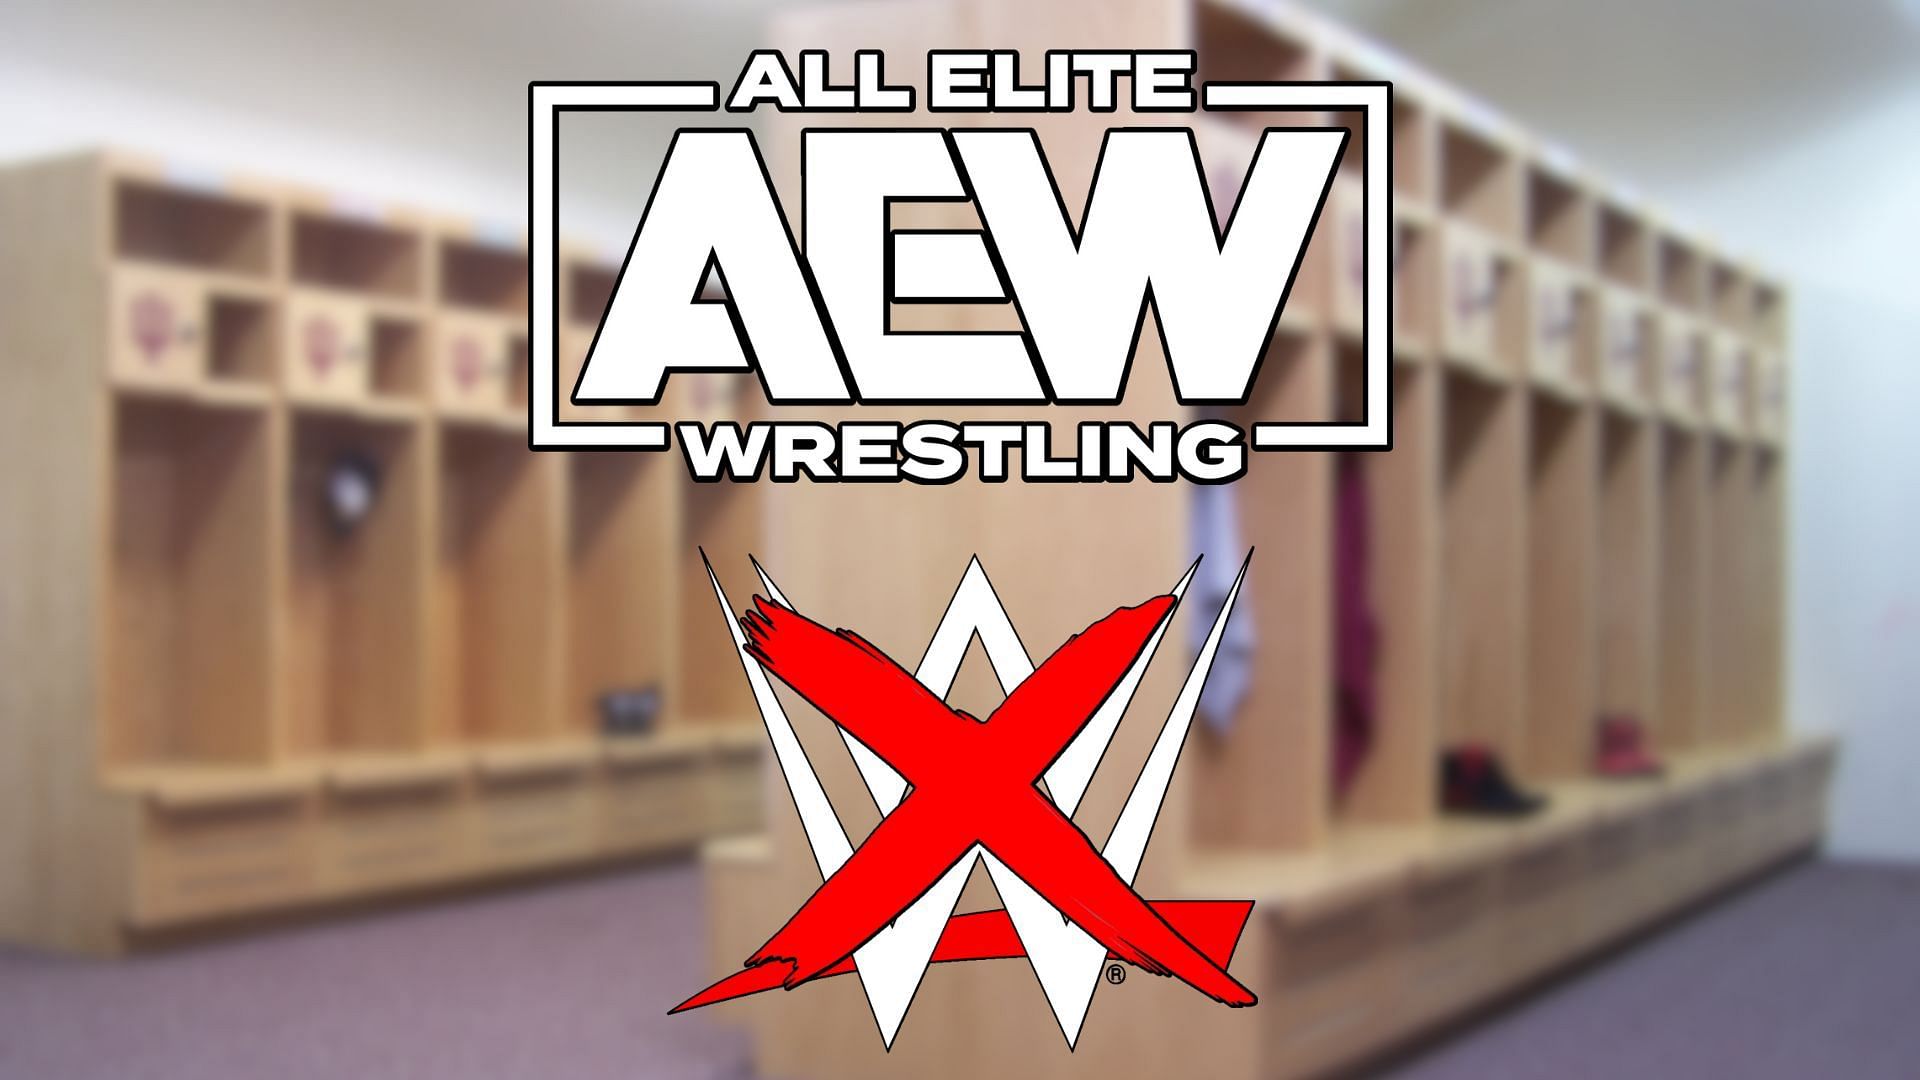 It seems like this WWE veteran is officially no longer with AEW.